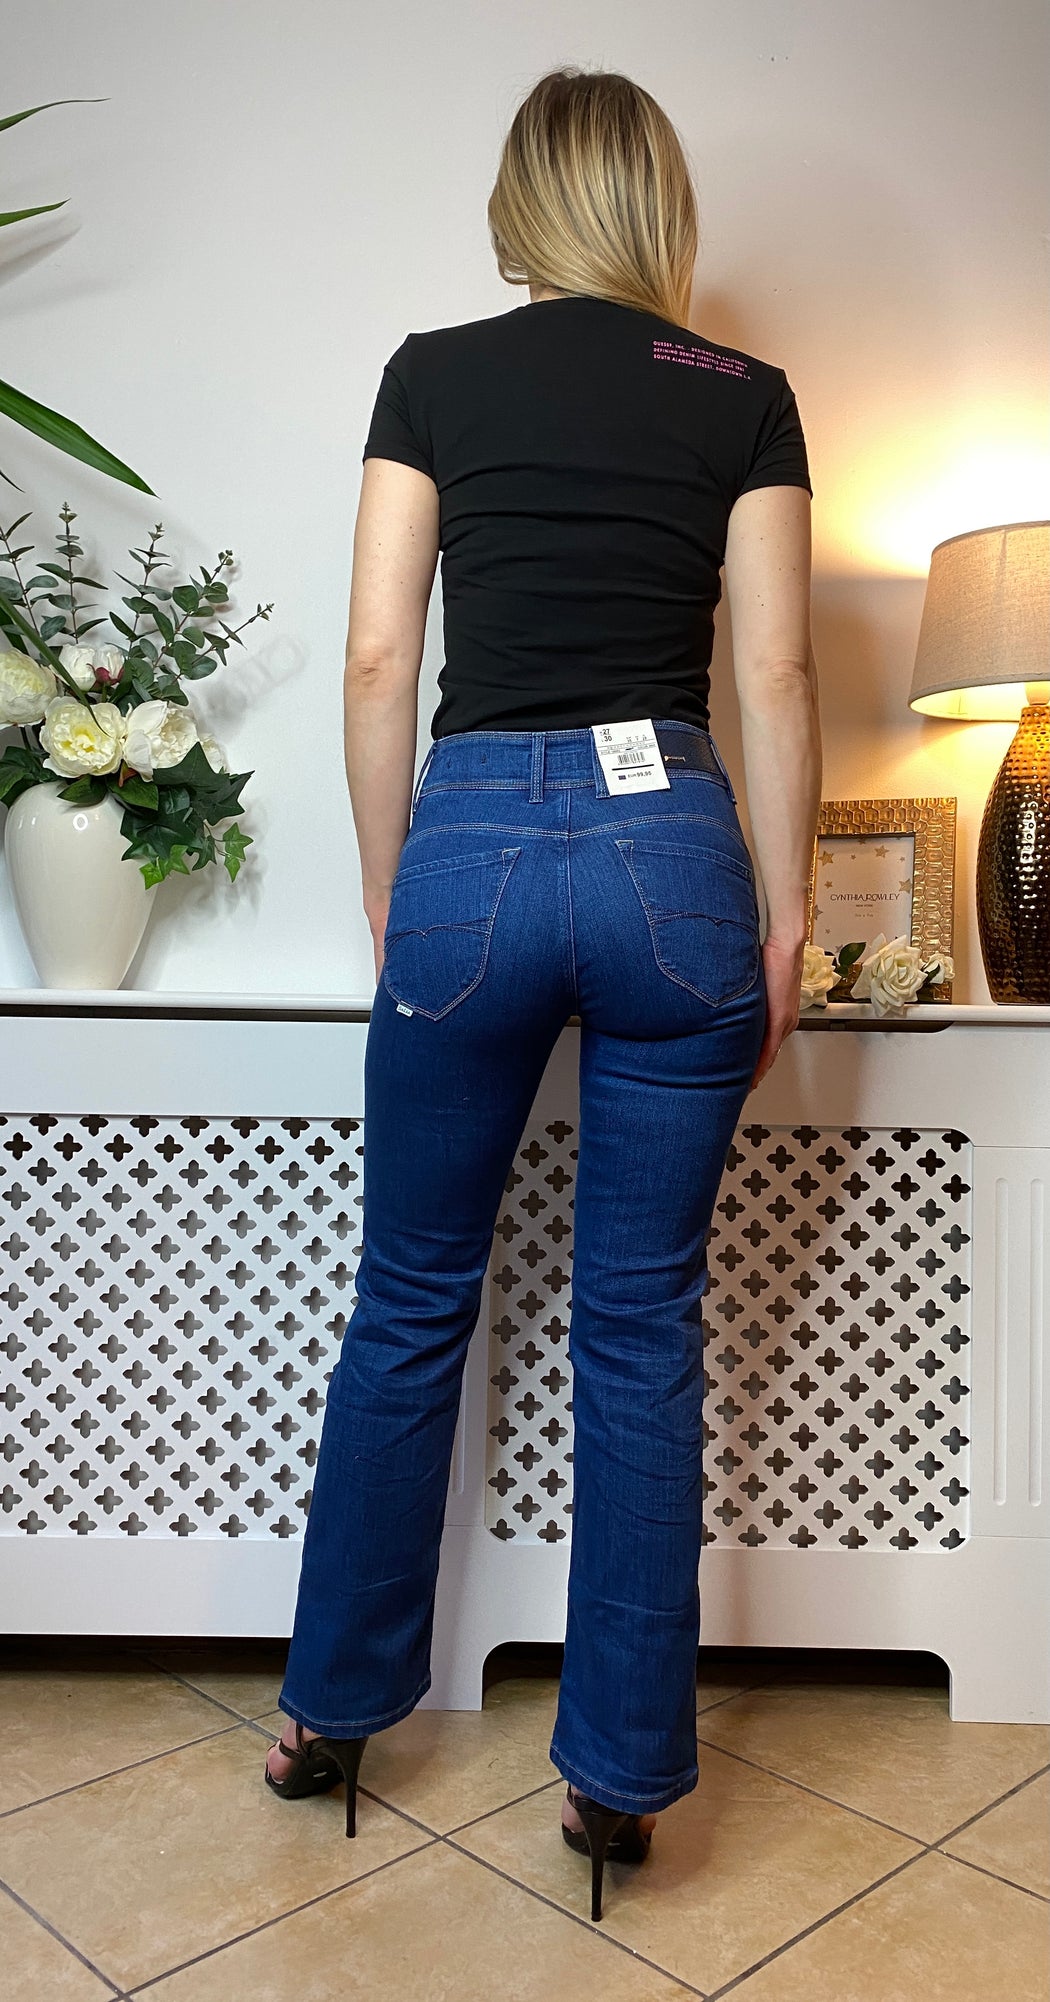 125983 BOOTCUT PUSH IN SECRET JEANS WITH DETAIL